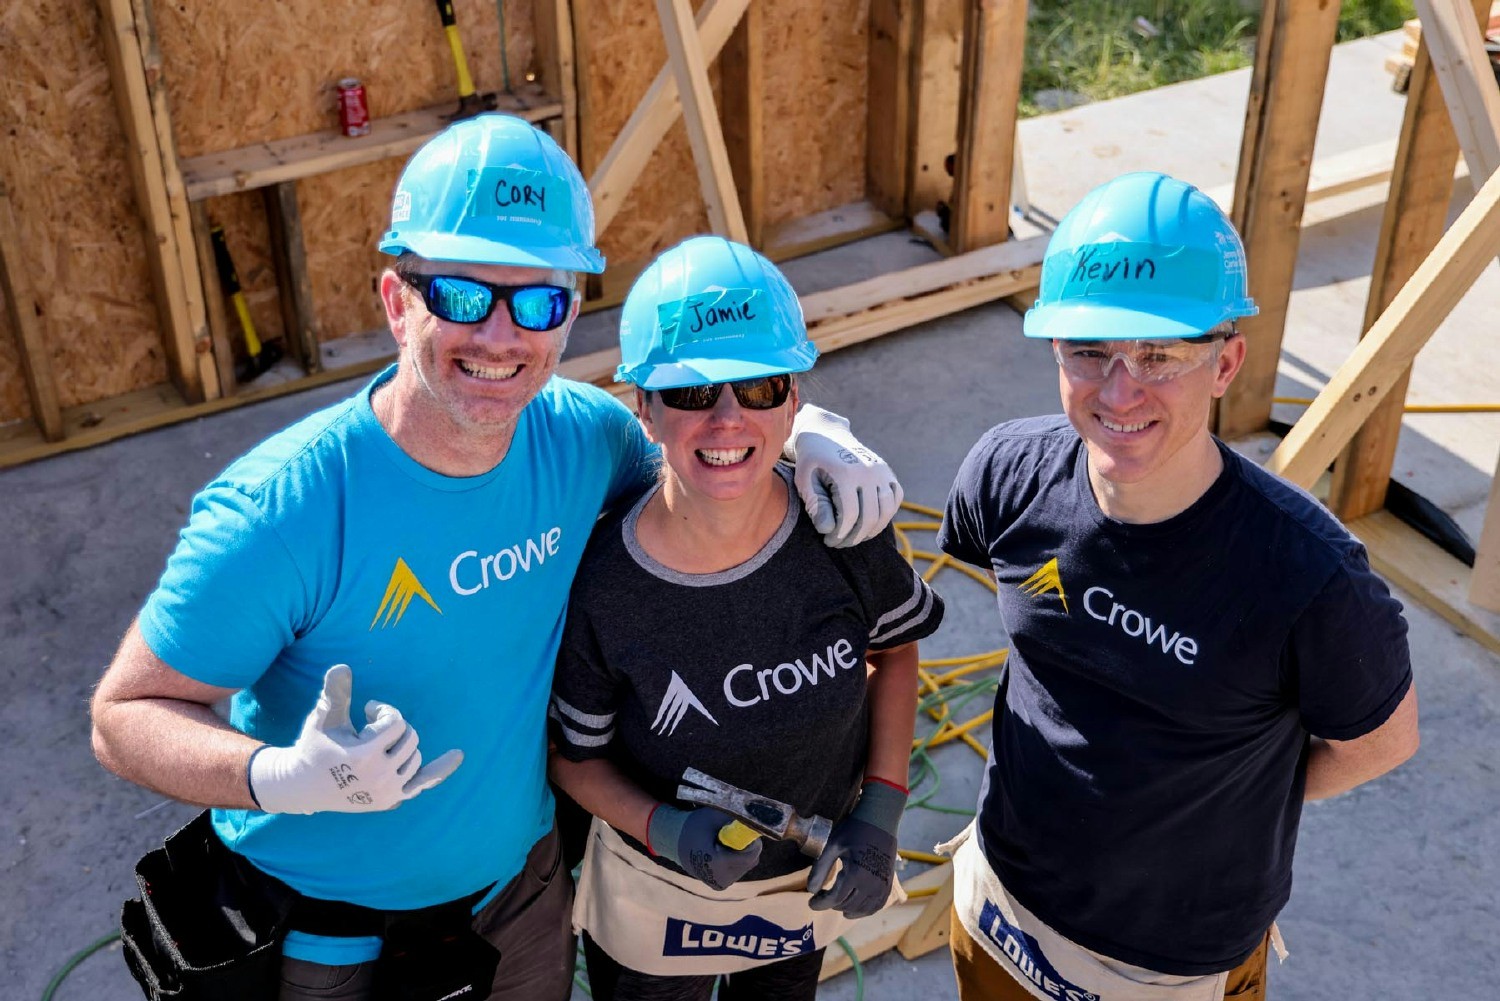 Giving back is a key part of who Crowe is and a reflection of our purpose & values. Here's our Nashville team with HFH!